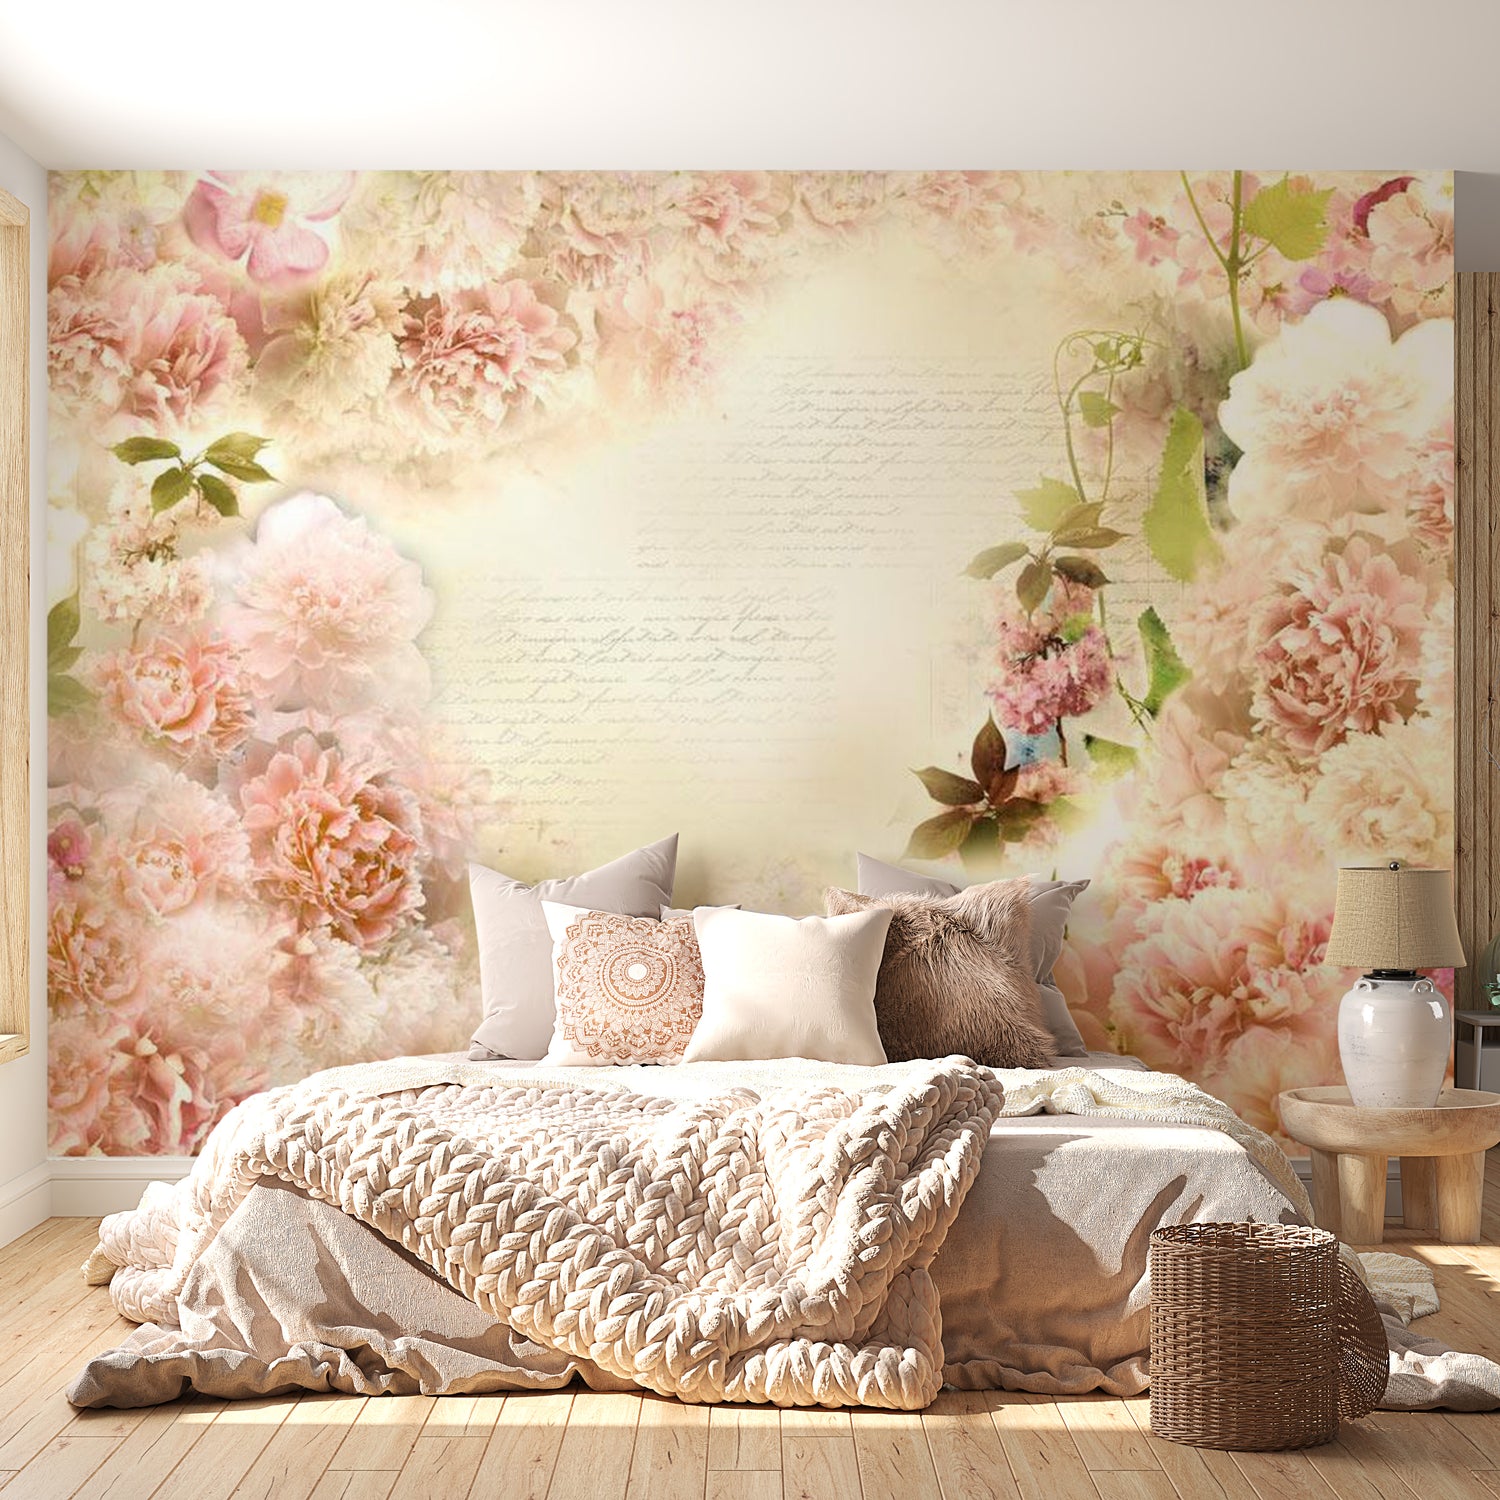 Peel & Stick Floral Wall Mural - Spring Fragrance - Removable Wall Decals